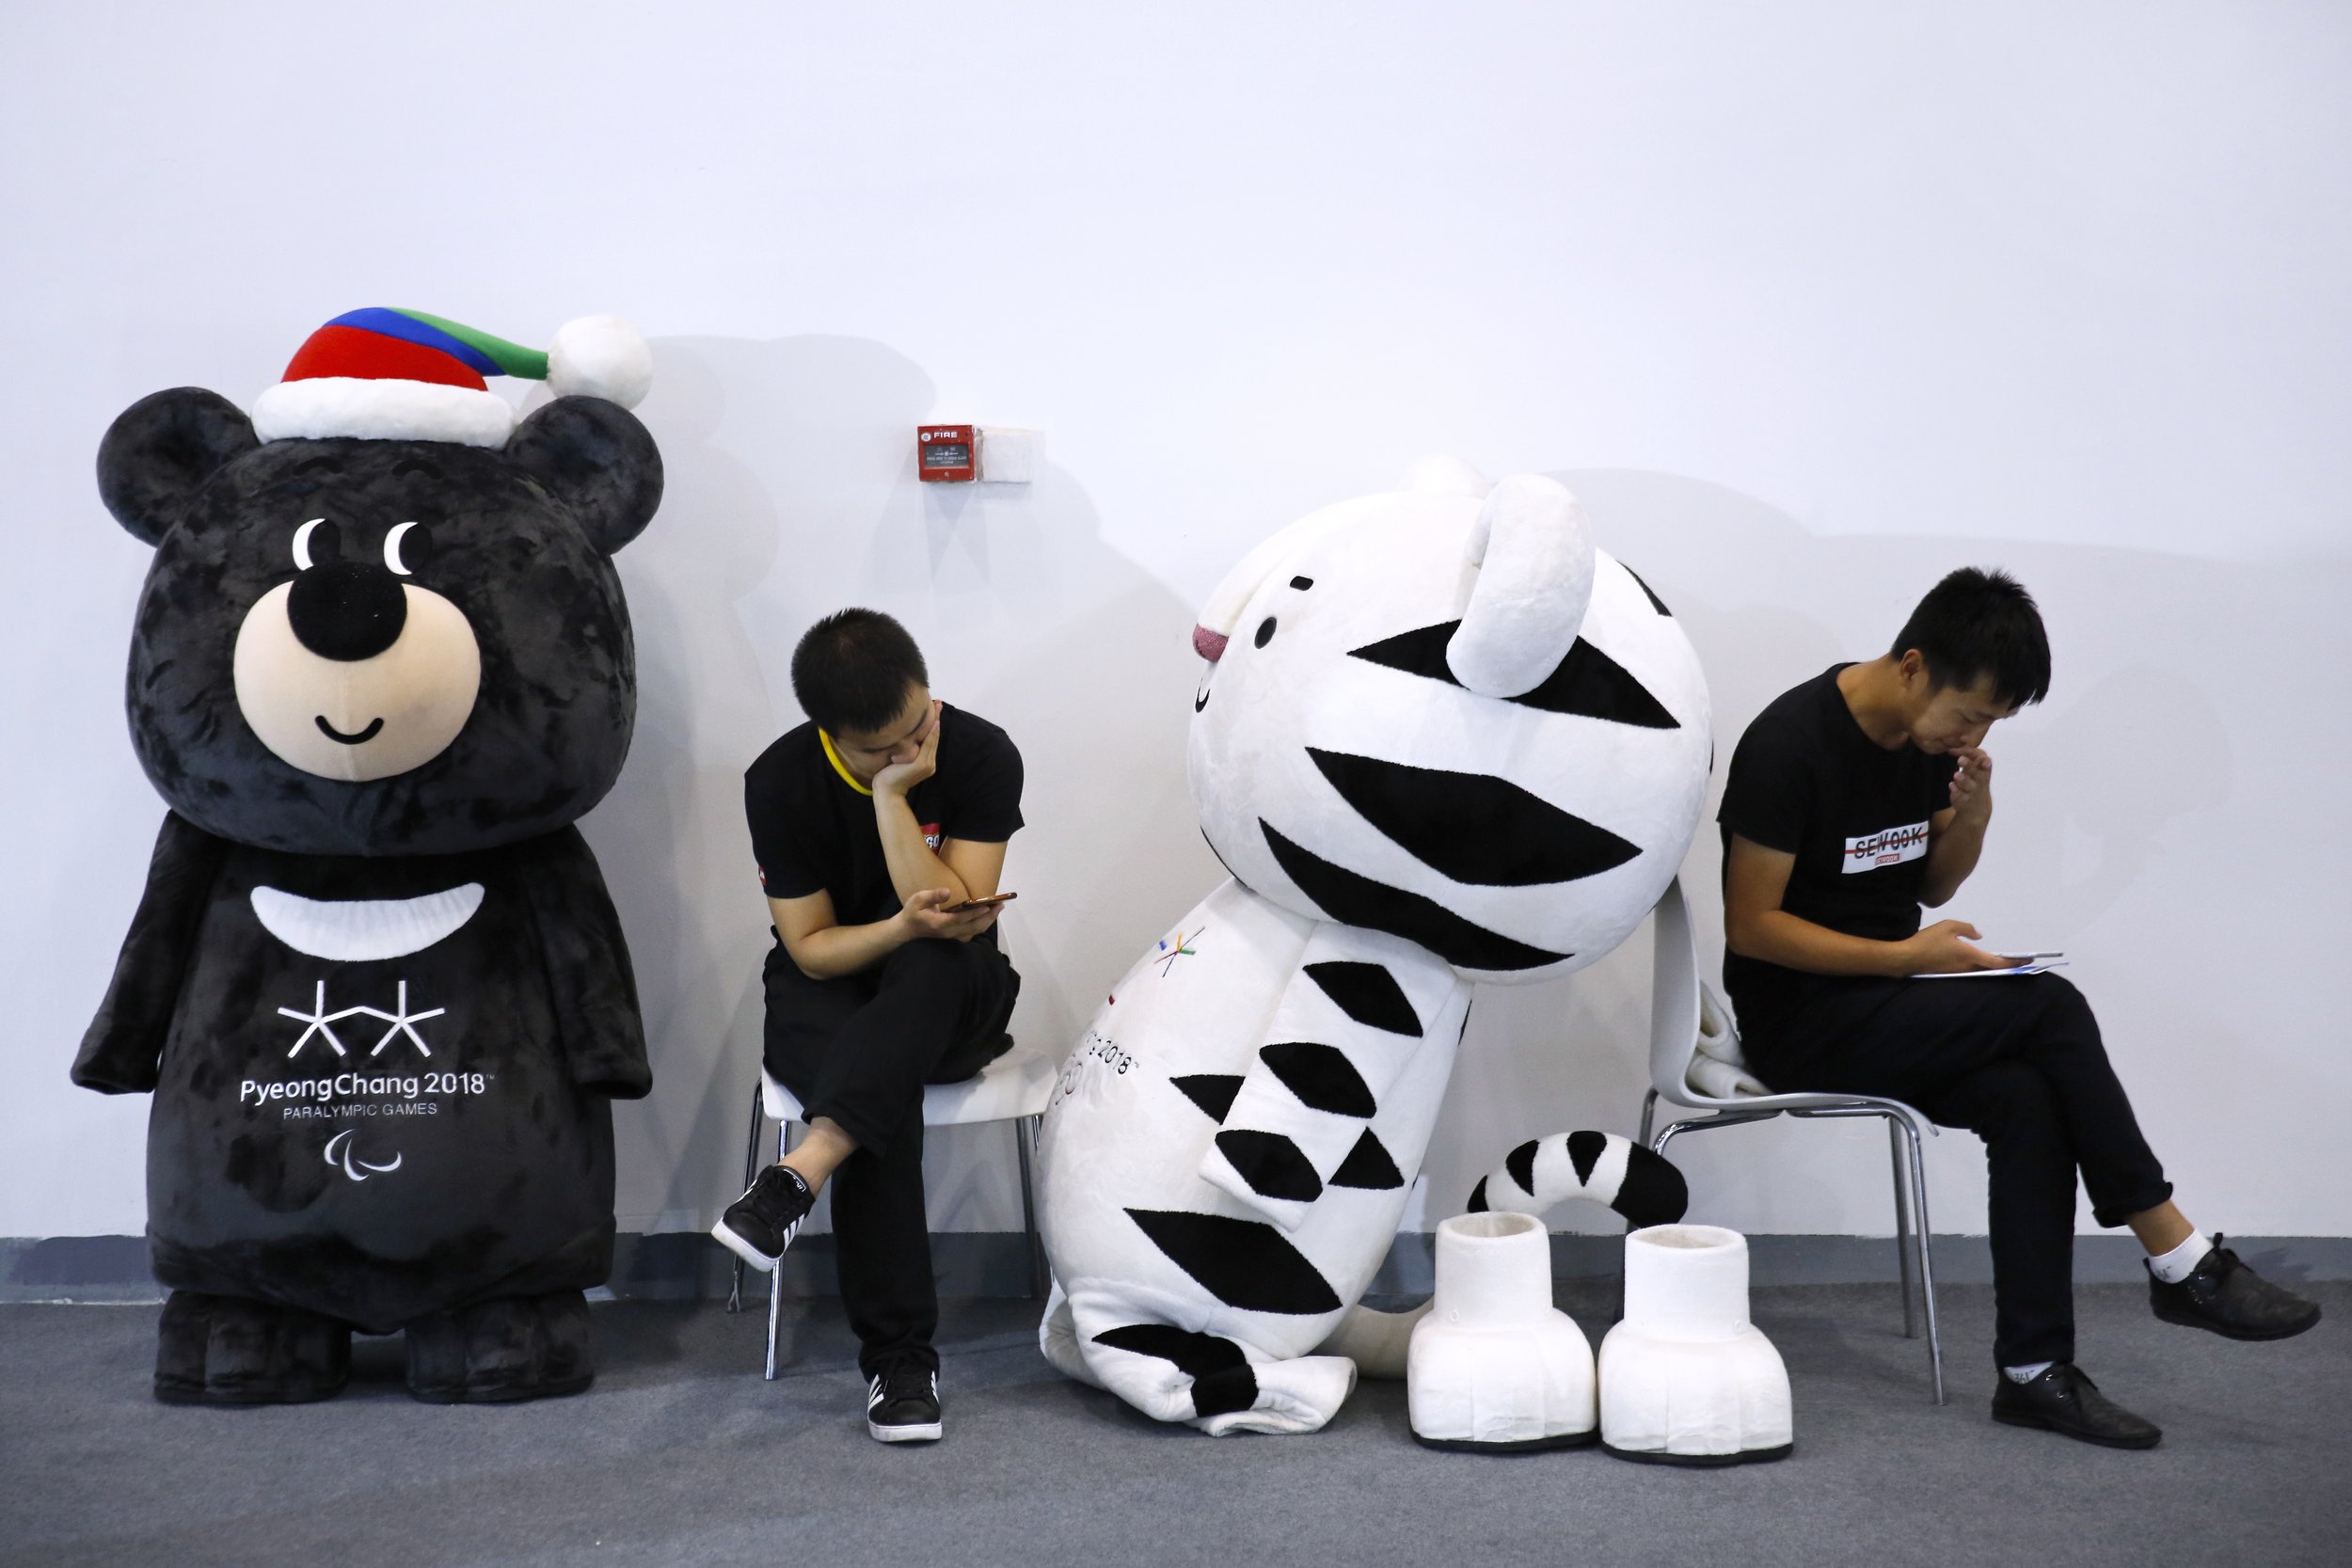  Workers browse their phones next to the mascots for the 2018 Pyeongchang Winter Olympics and Paralympic Games near the South Korean booth during the World Winter Sports Expo in Beijing, Sept. 7, 2017.  (AP Photo/Andy Wong) 